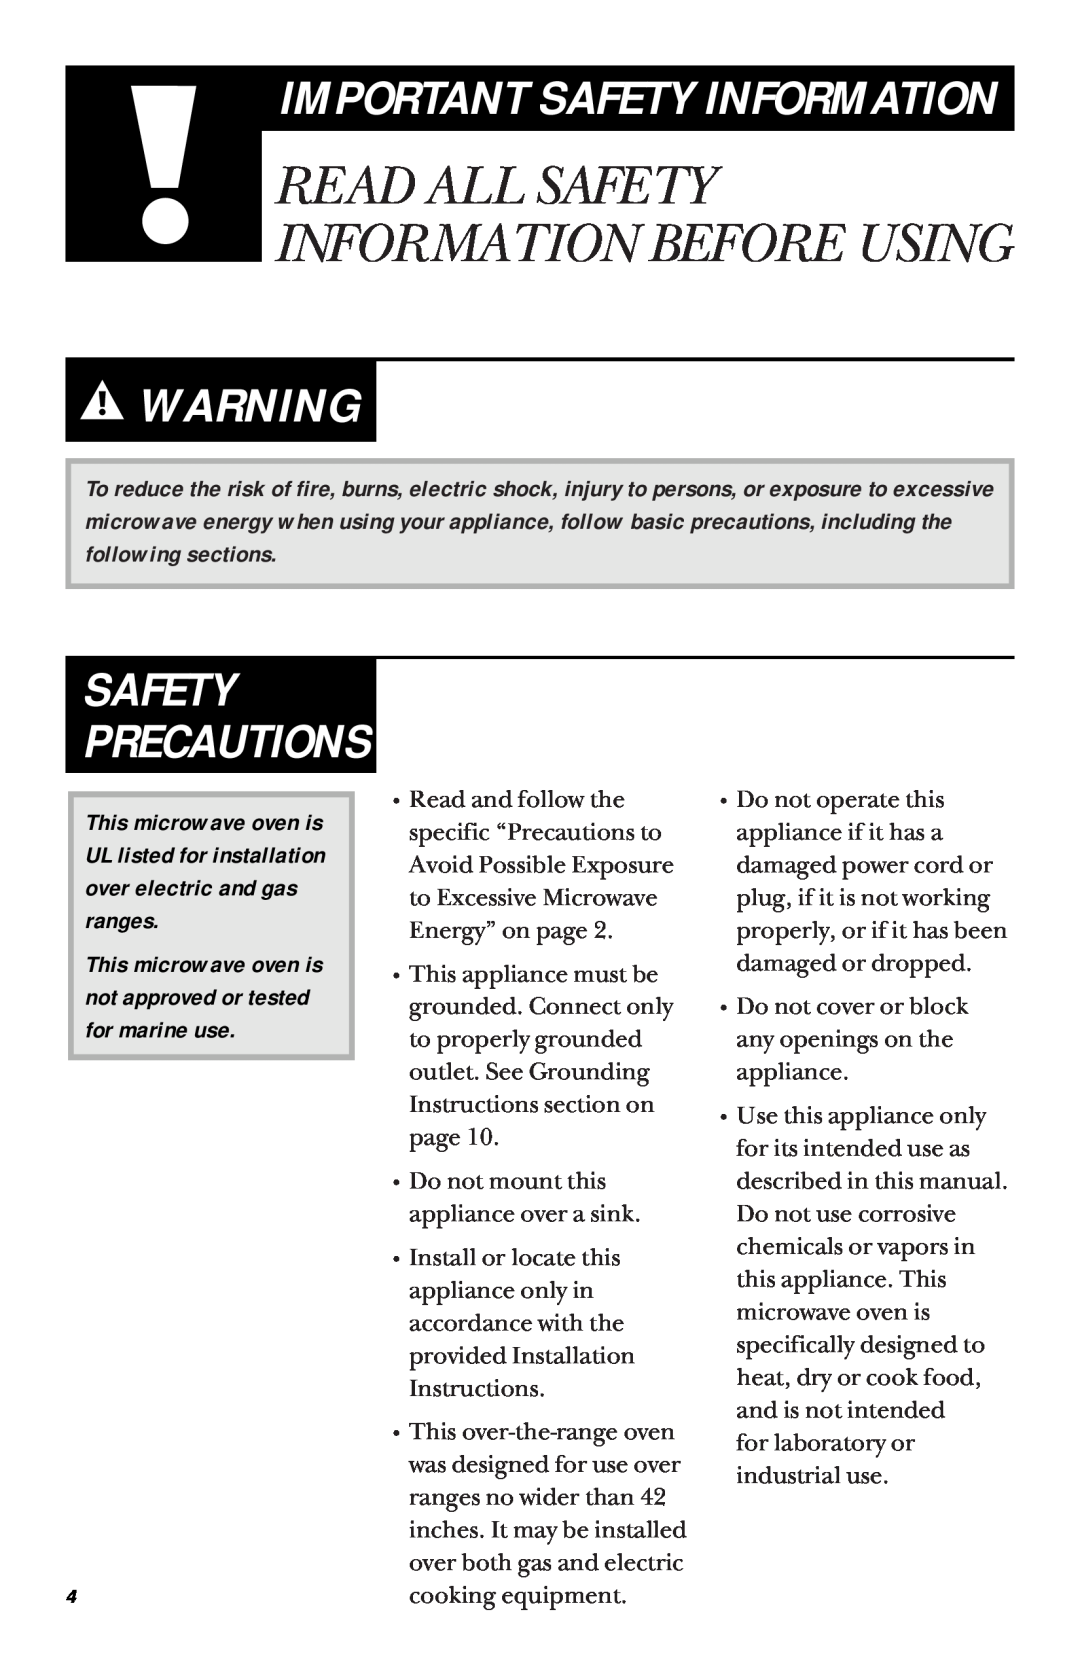 GE 900 Watts JVM1430, JVM1431 Safety Precautions, Read All Safety Information Before Using, Important Safety Information 